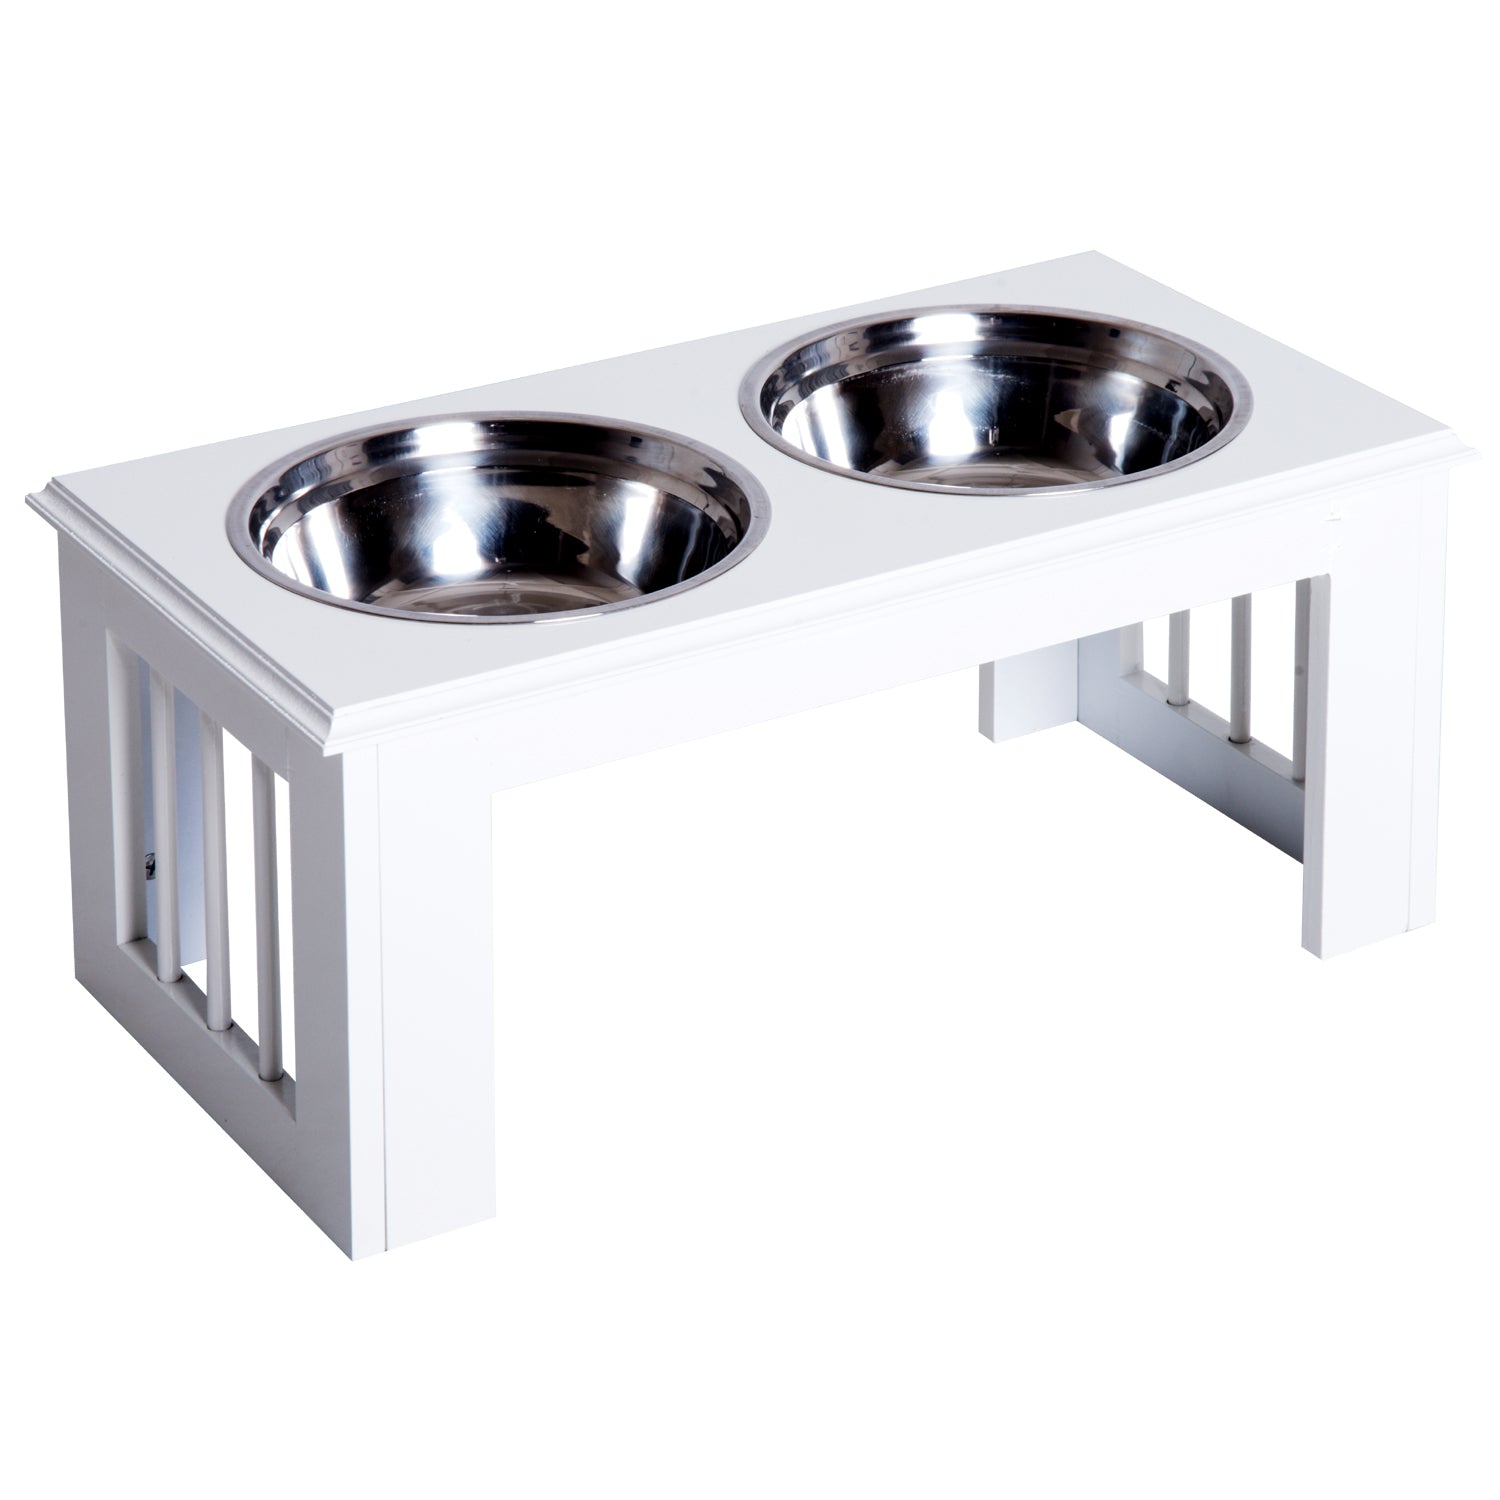 Stainless Steel Pet Feeder, 58.4Lx30.5Wx25.4H cm-White